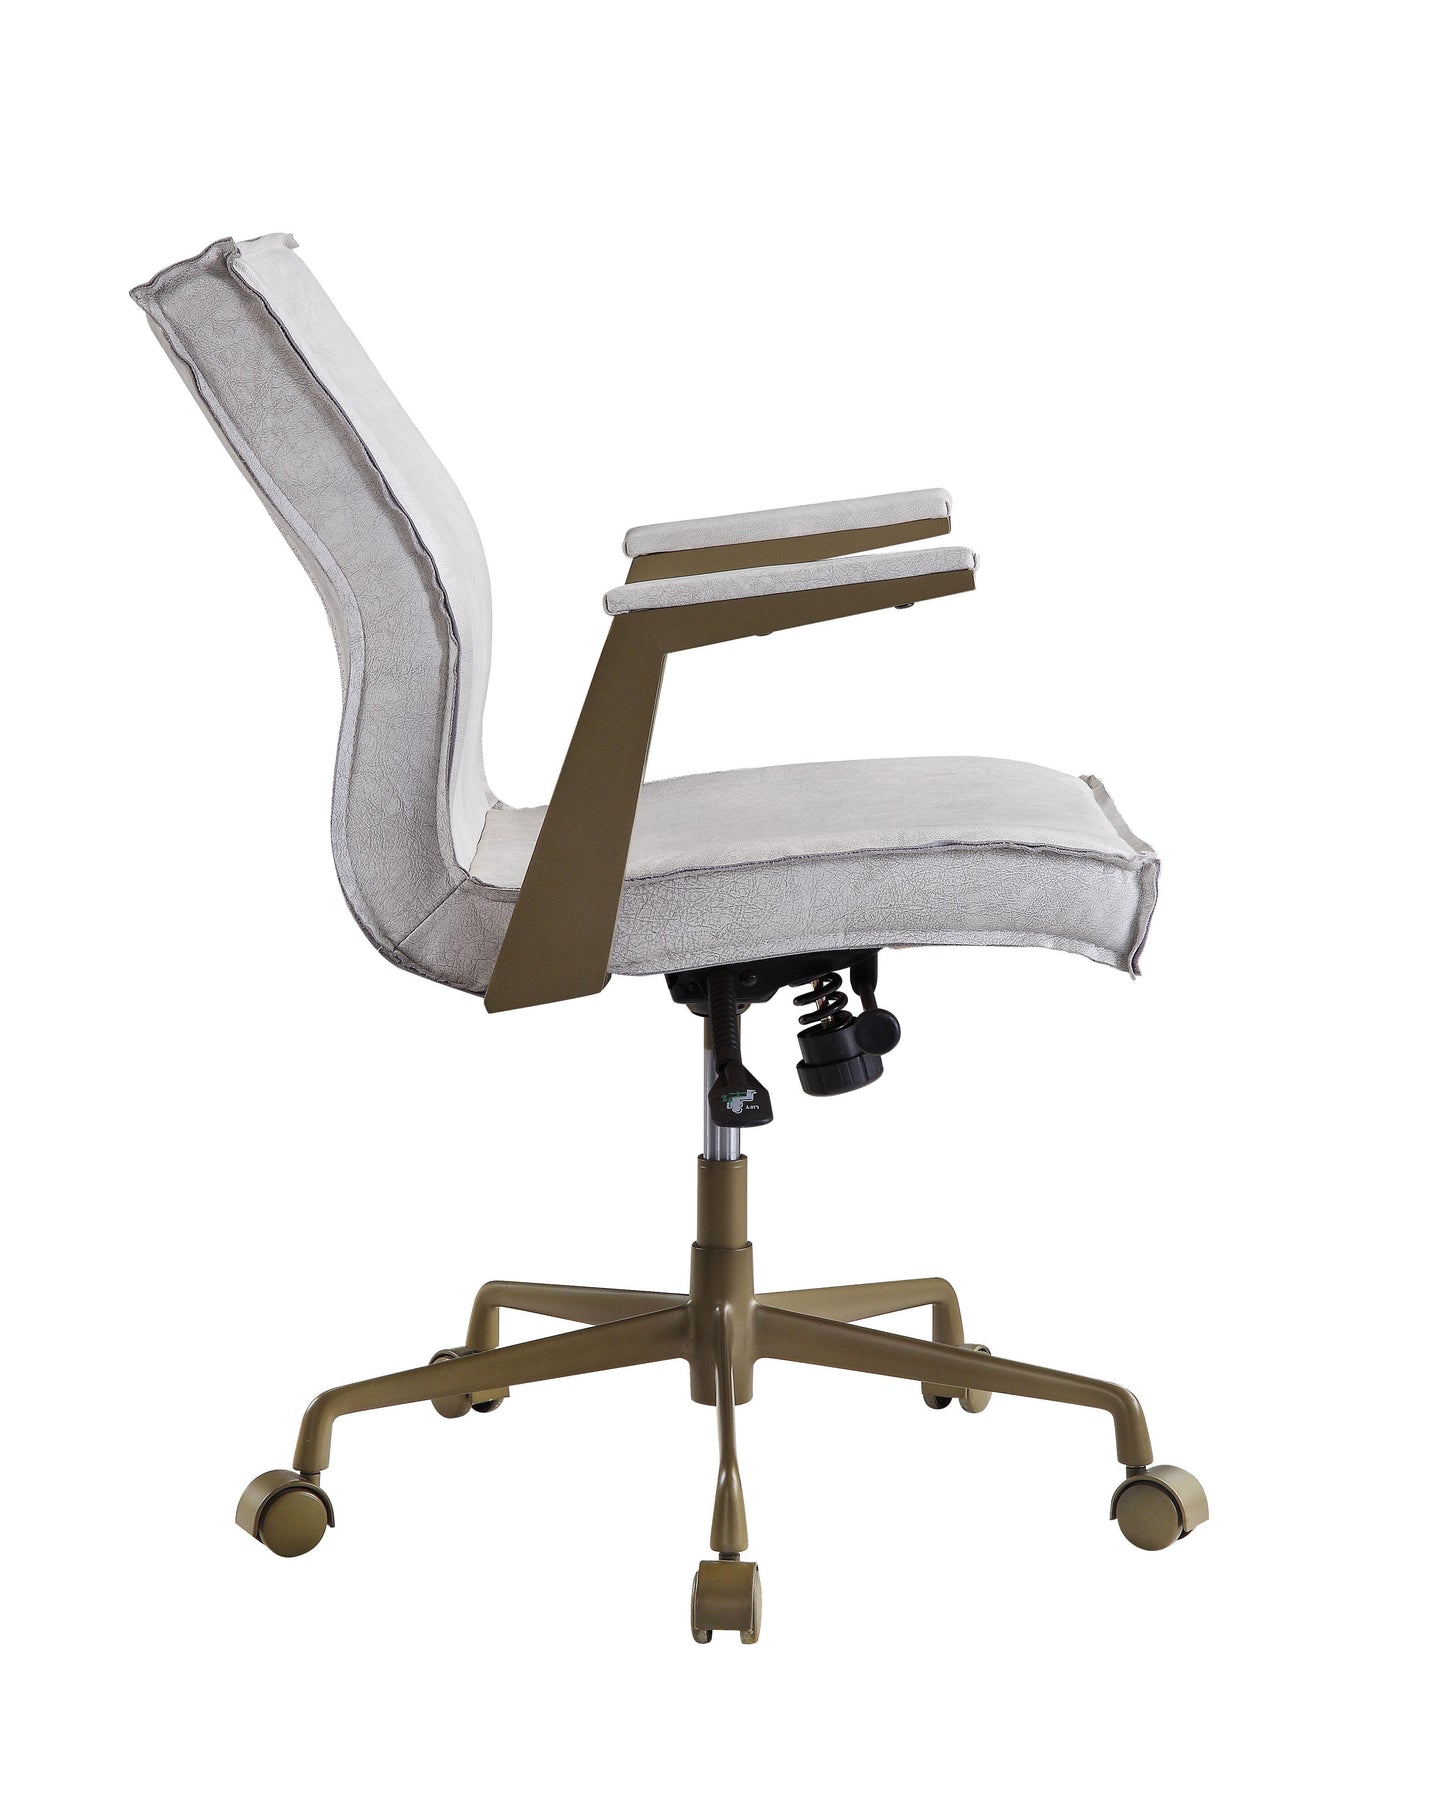 ACME Attica Executive Office Chair, Vintage White Top Grain Leather FredCo